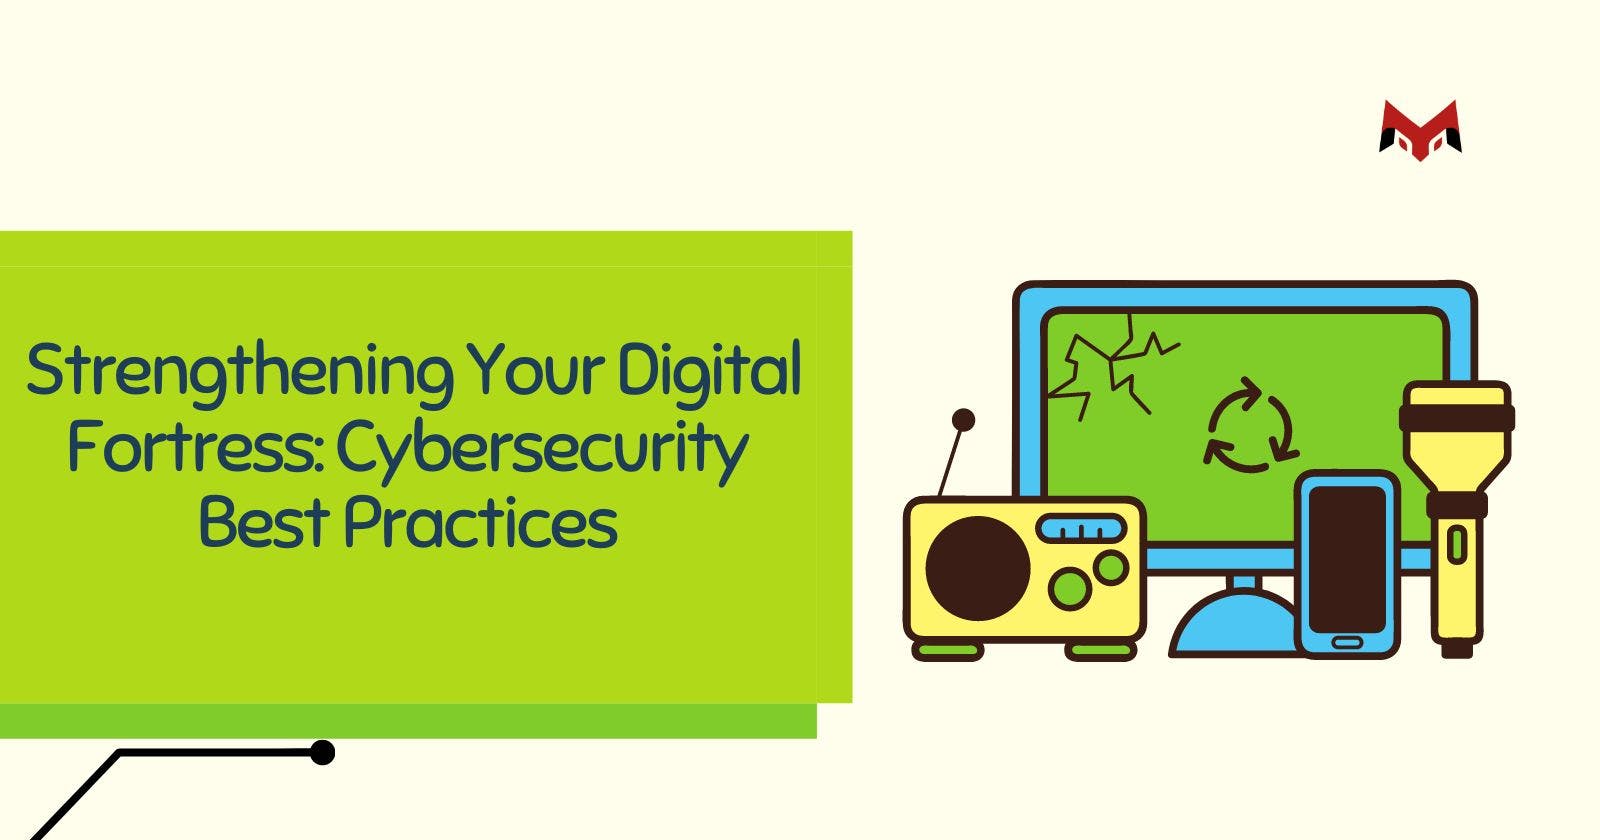 Strengthening Your Digital Fortress: Cybersecurity Best Practices